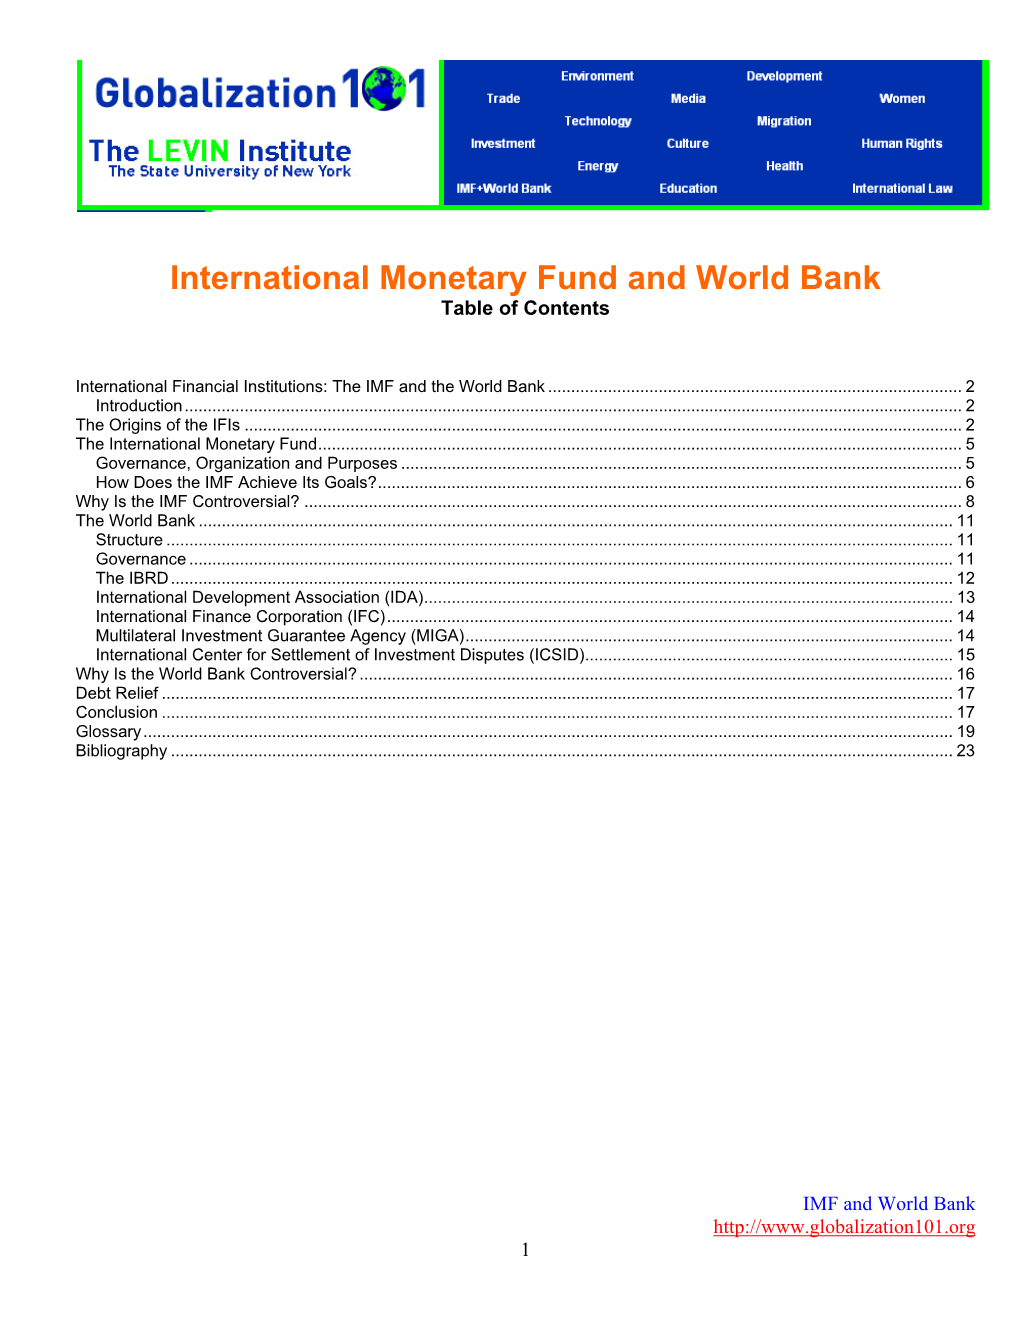 International Monetary Fund and World Bank Table of Contents